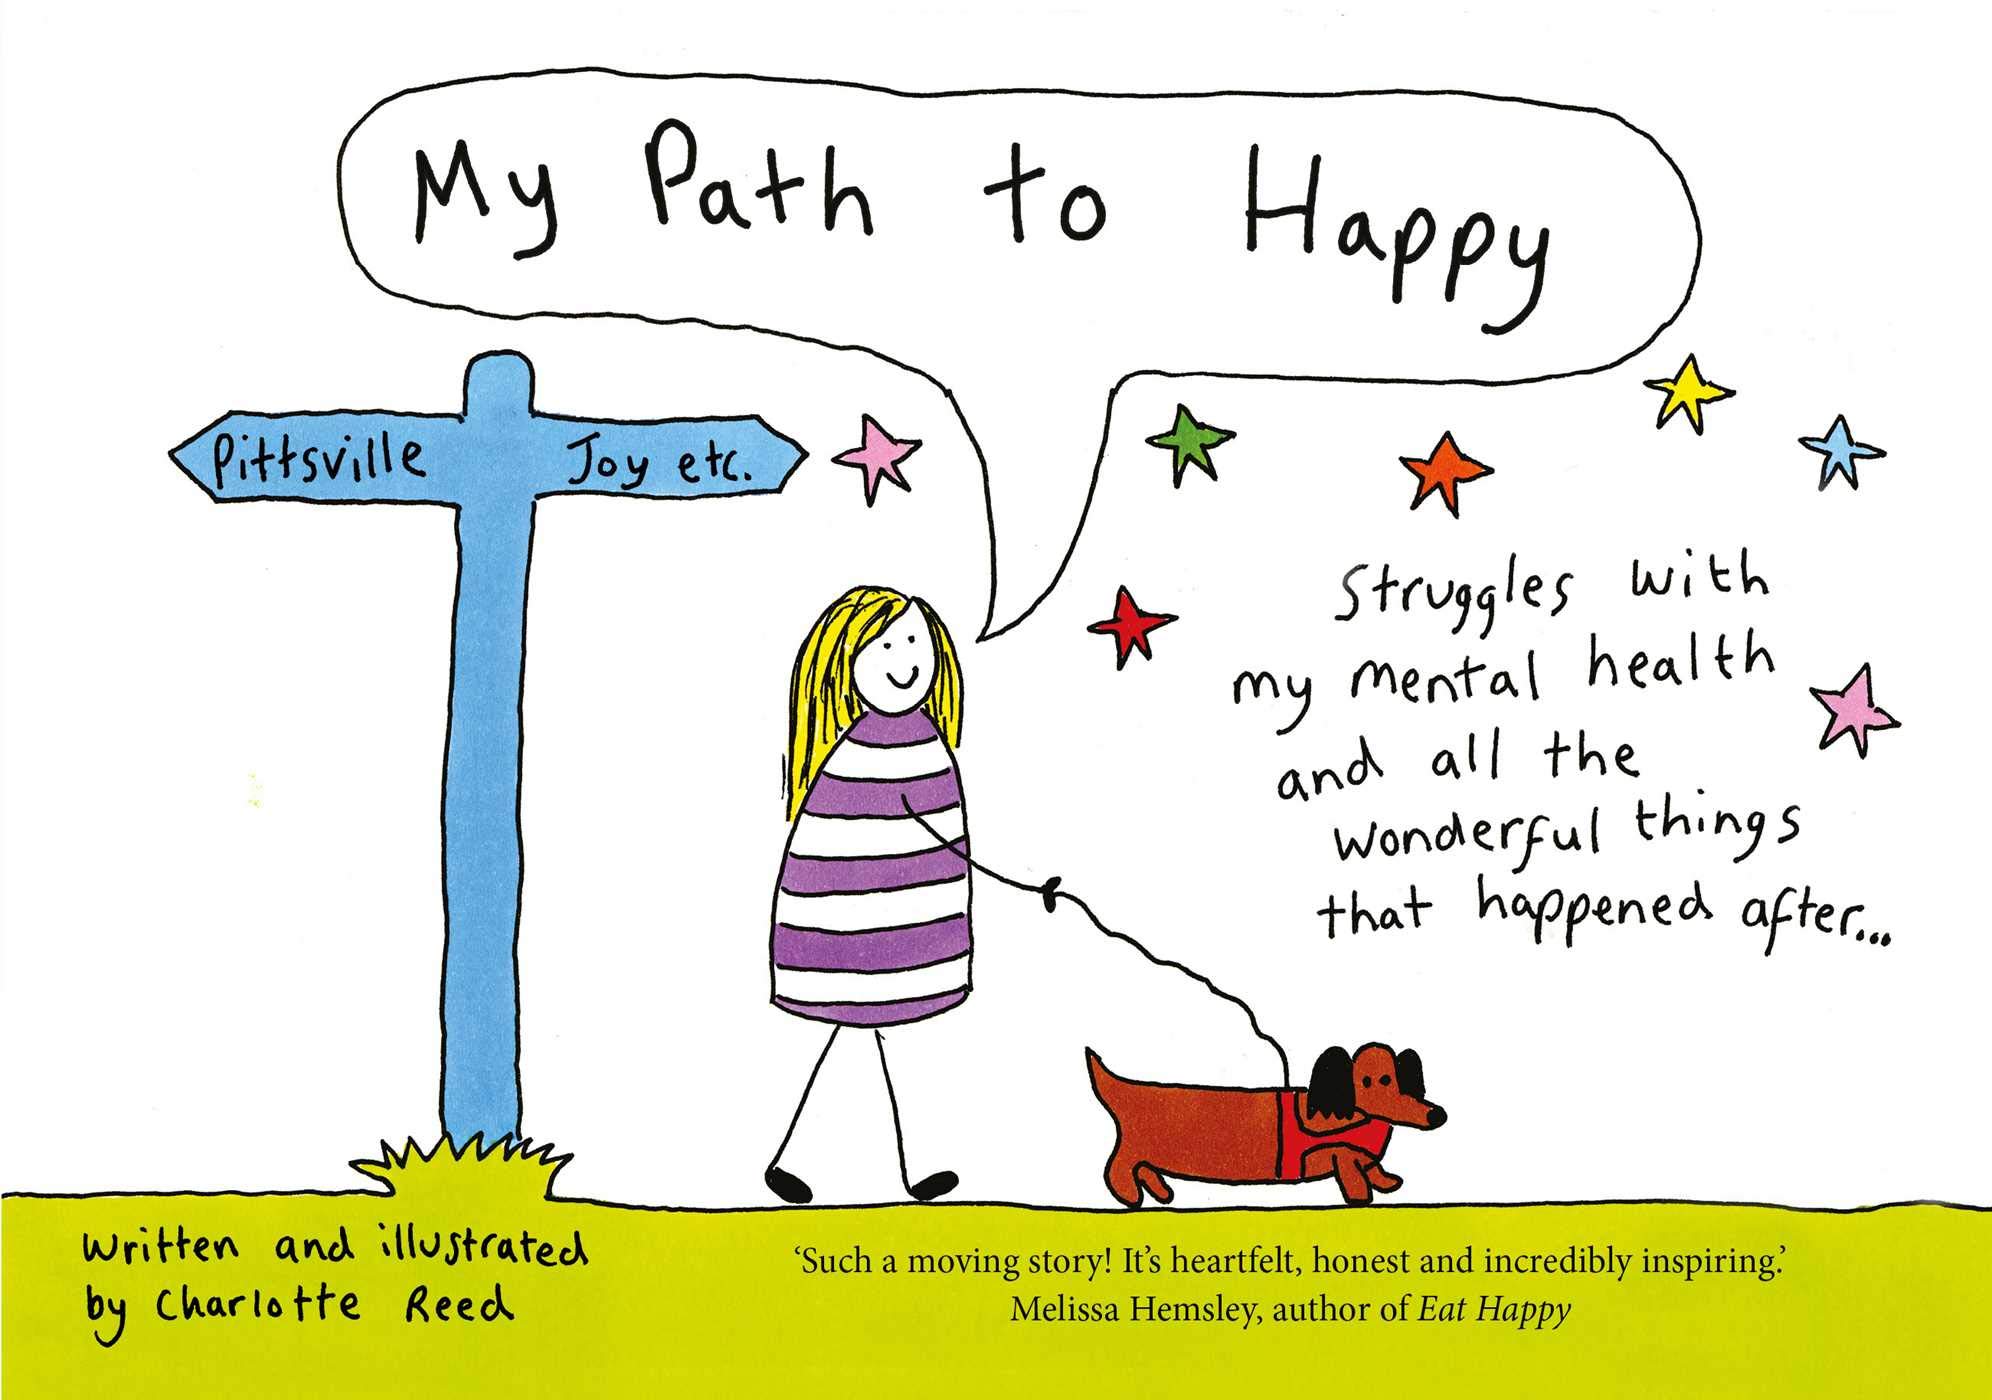 My Path to Happy - Charlotte Reed